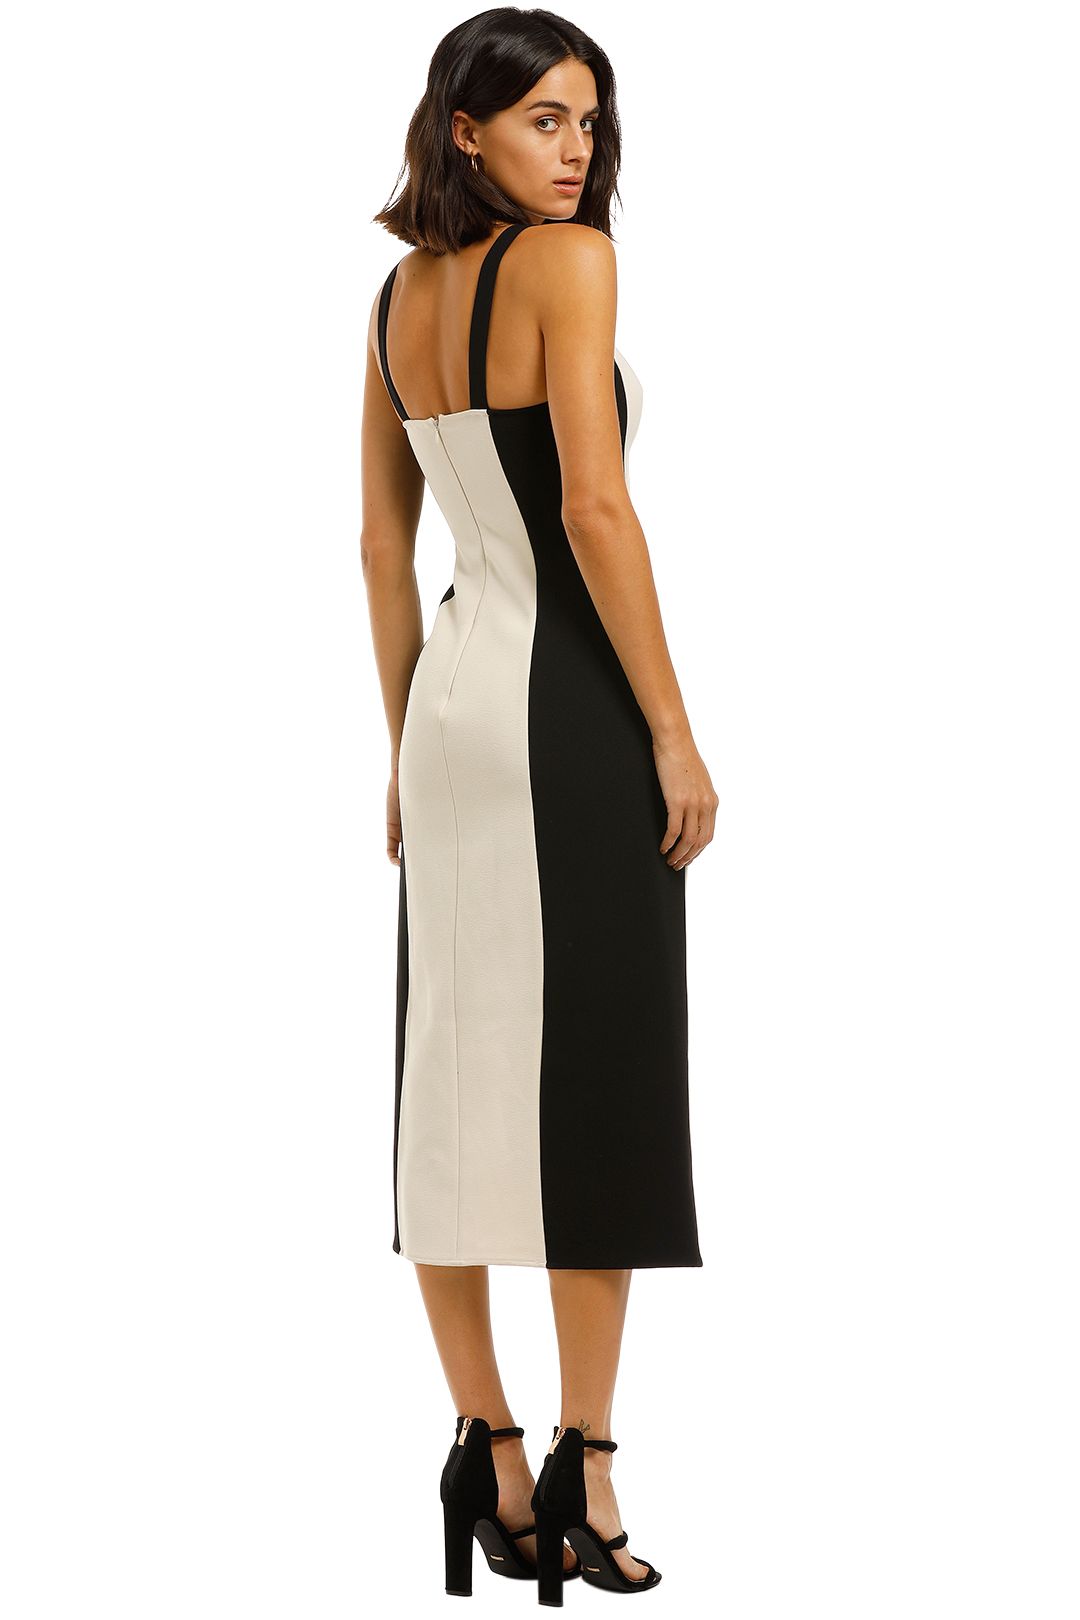 CMEO-Collective-Consumed-Sleeveless-Midi-Dress-Back